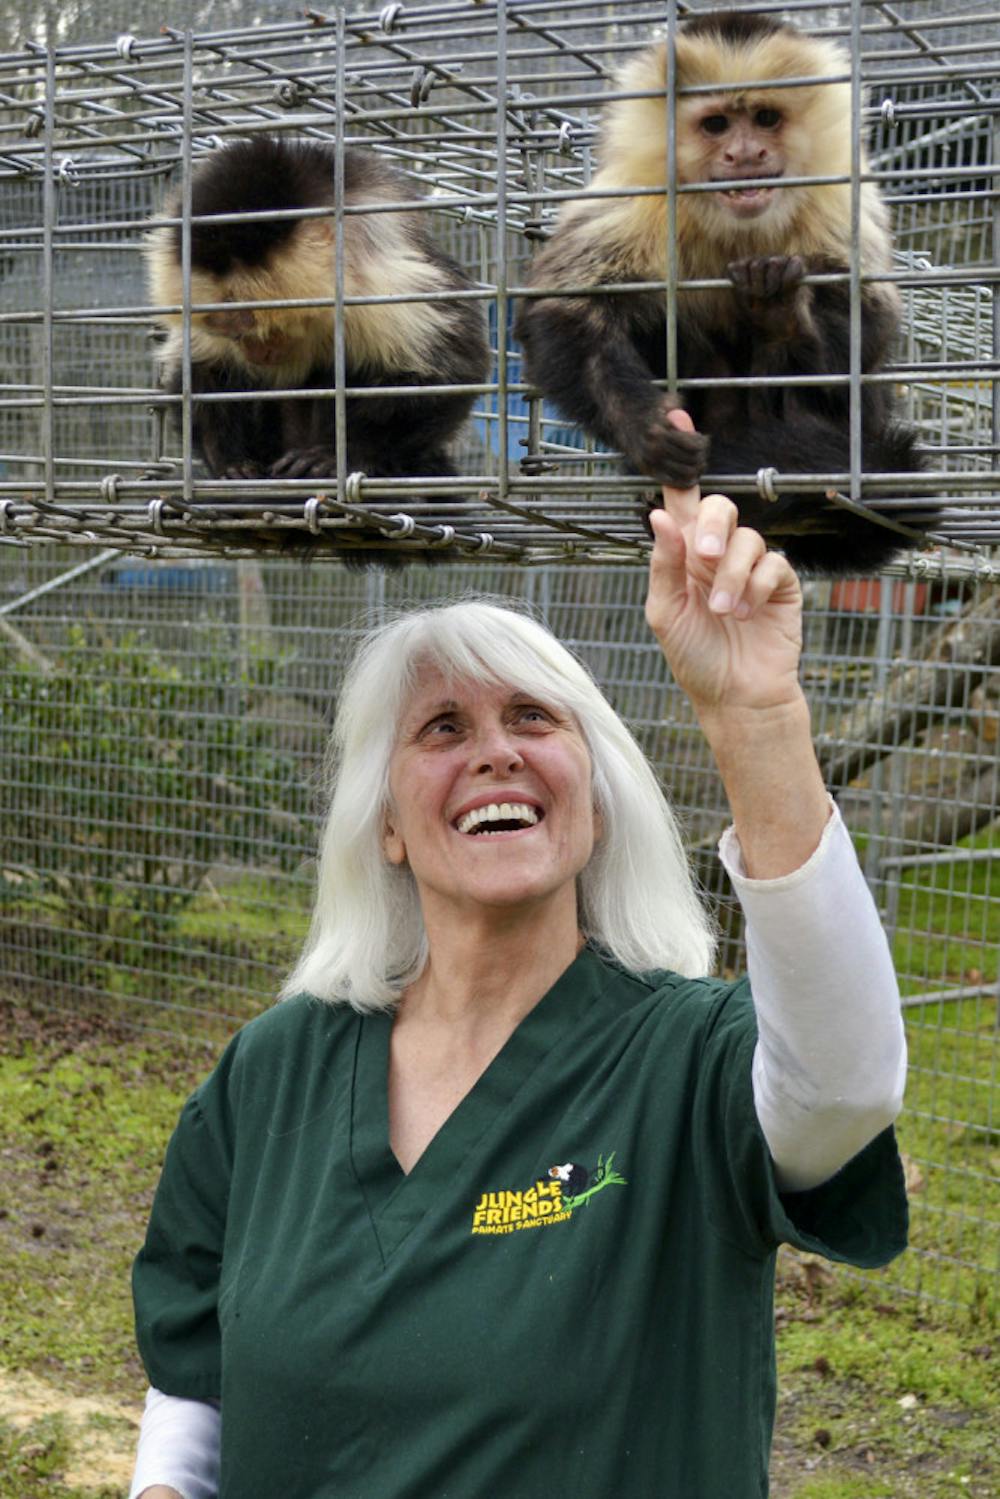 <p><span id="docs-internal-guid-8d59c52b-5d3d-6bf7-765f-ed09e7706954"><span>Samantha and Charlotte, a pair of white-faced capuchin monkey sisters, sit above their owner, 61-year-old Kari Bagnall, in the Jungle Friends Primate Sanctuary on Tuesday afternoon.</span></span></p>